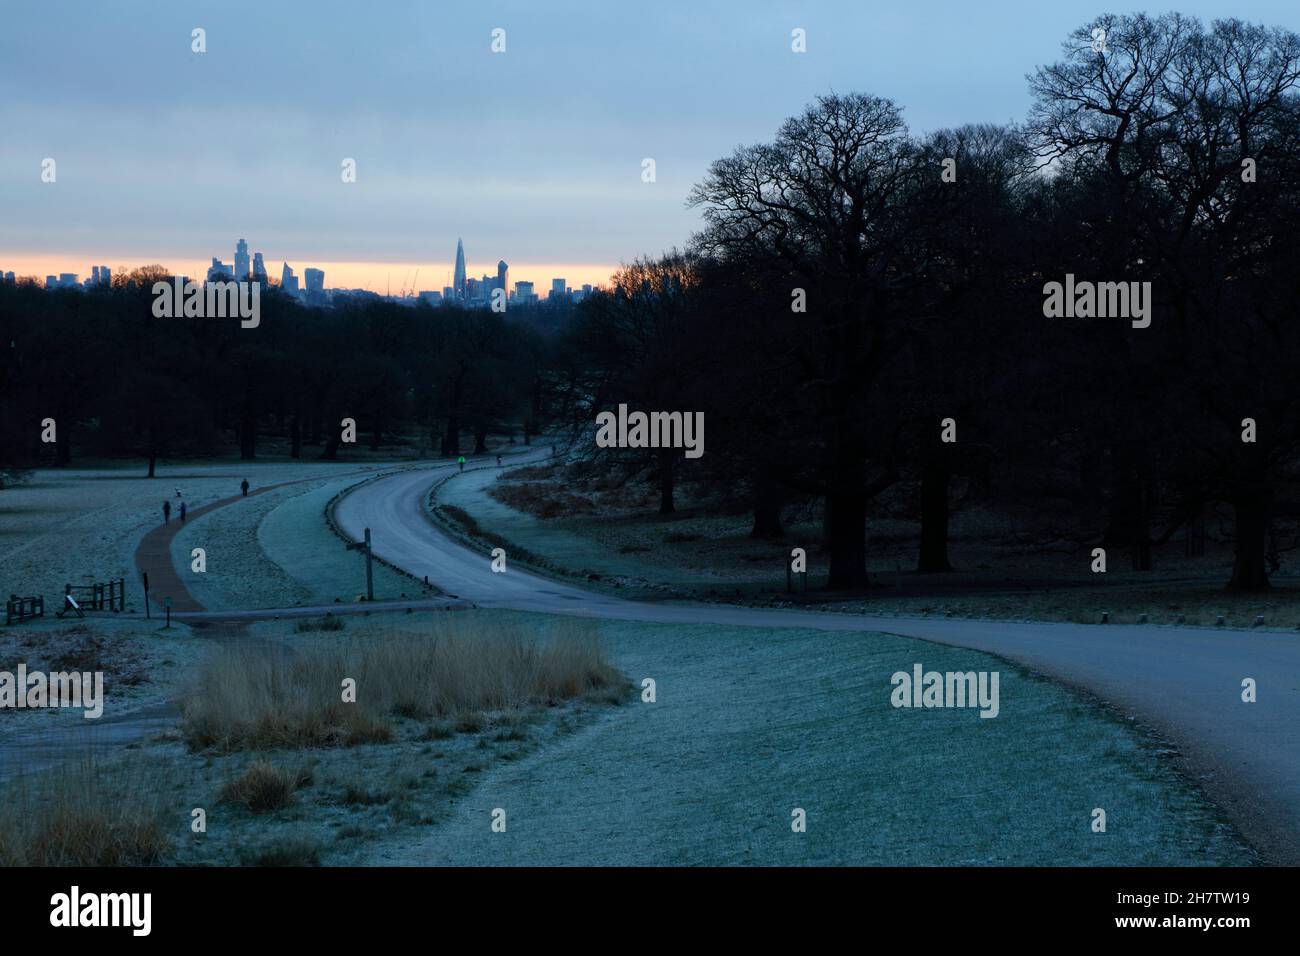 View of the City of London from Sawyer’s Hill, Richmond Park, London, UK Stock Photo